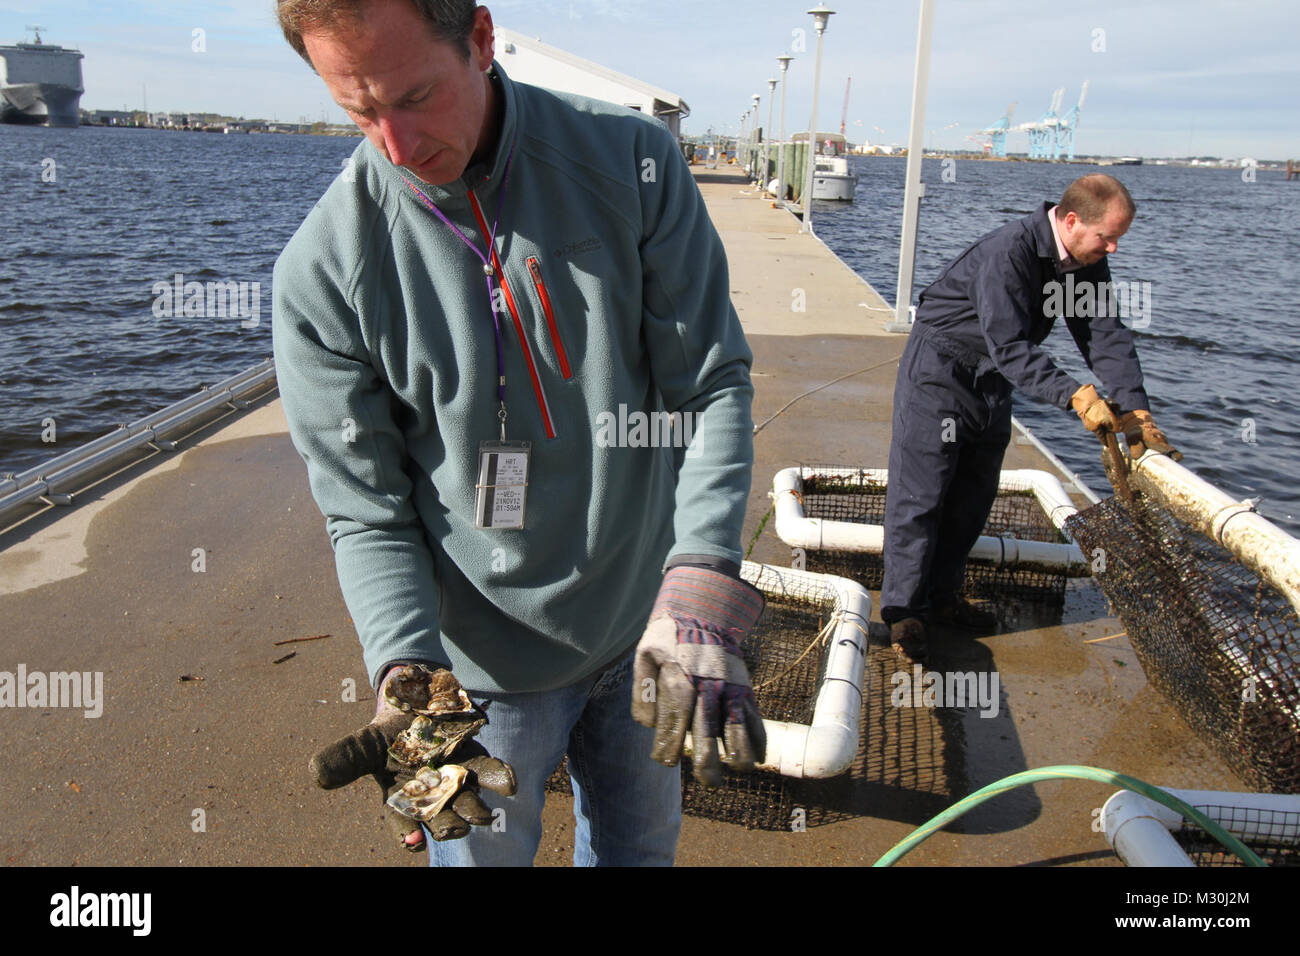 Jeff Swallow and Jason O’Neal of Norfolk District clean Taylor Floats of sea squirts and barnacles. The organisms compete for food of the baby spat oysters housed in the Taylor Floats. Swallow holds adult oyster shells, where new oysters have attached and will continue to grow and cluster. The current native oyster population in the Chesapeake Bay is less than one percent of its original total when English Captain John Smith arrived in Virginia in the early 17th century. He would later describe in his journal that the oysters were as “big as dinner plates.” In a continuing effort to restore th Stock Photo